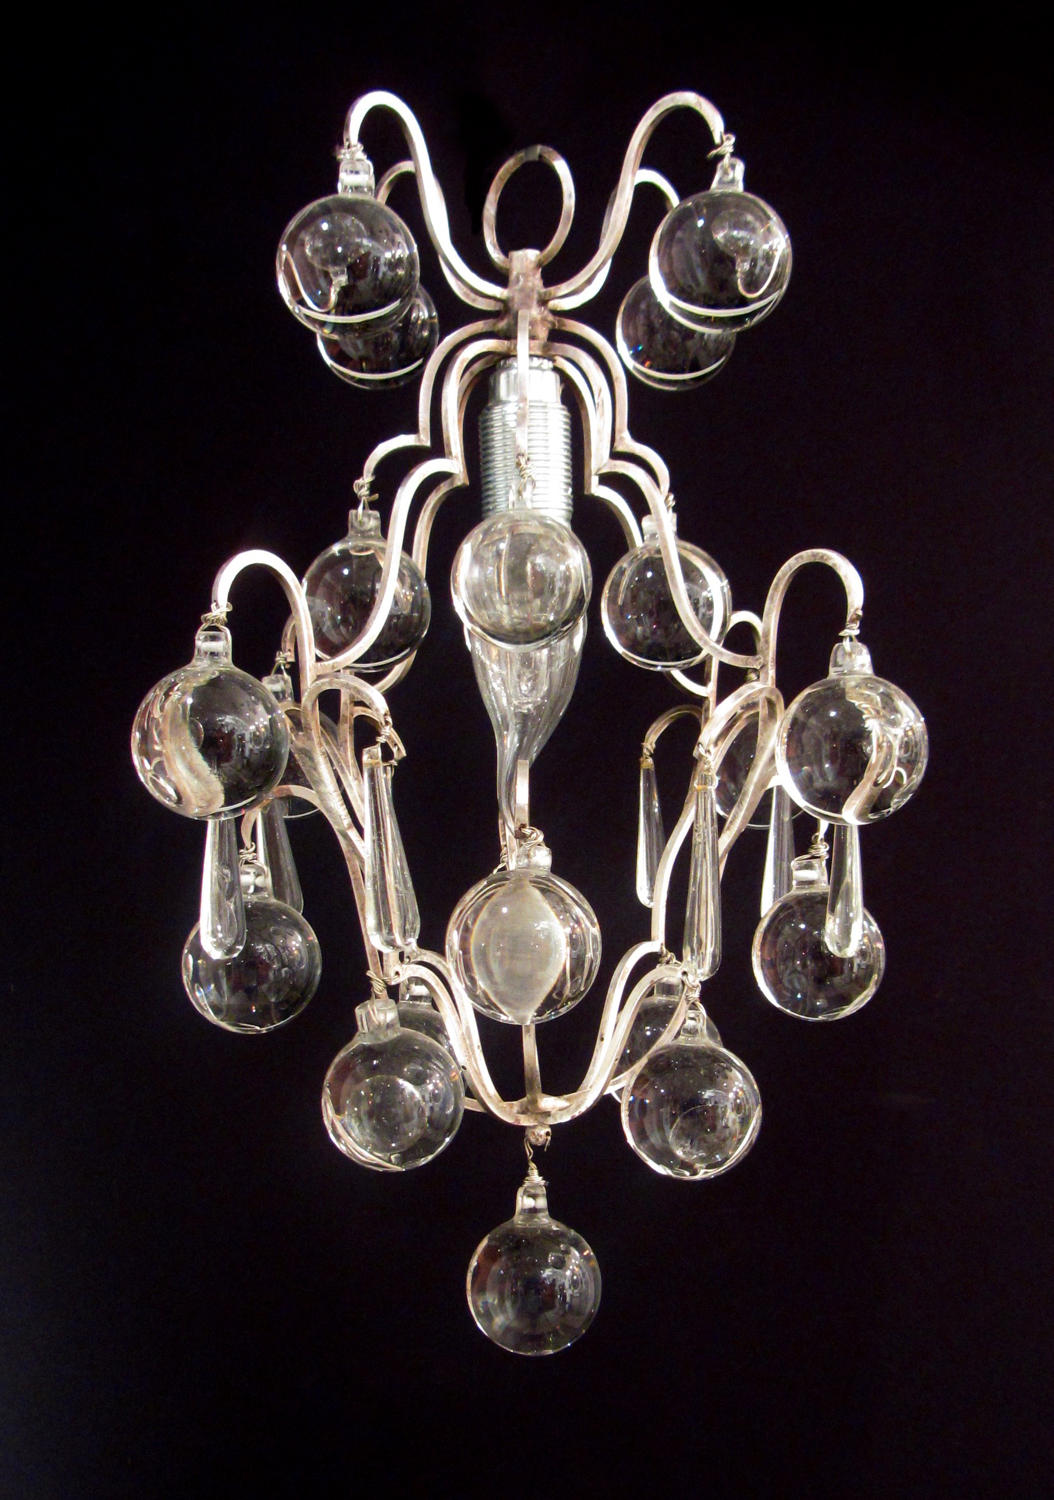 A silvered 'ball' chandelier